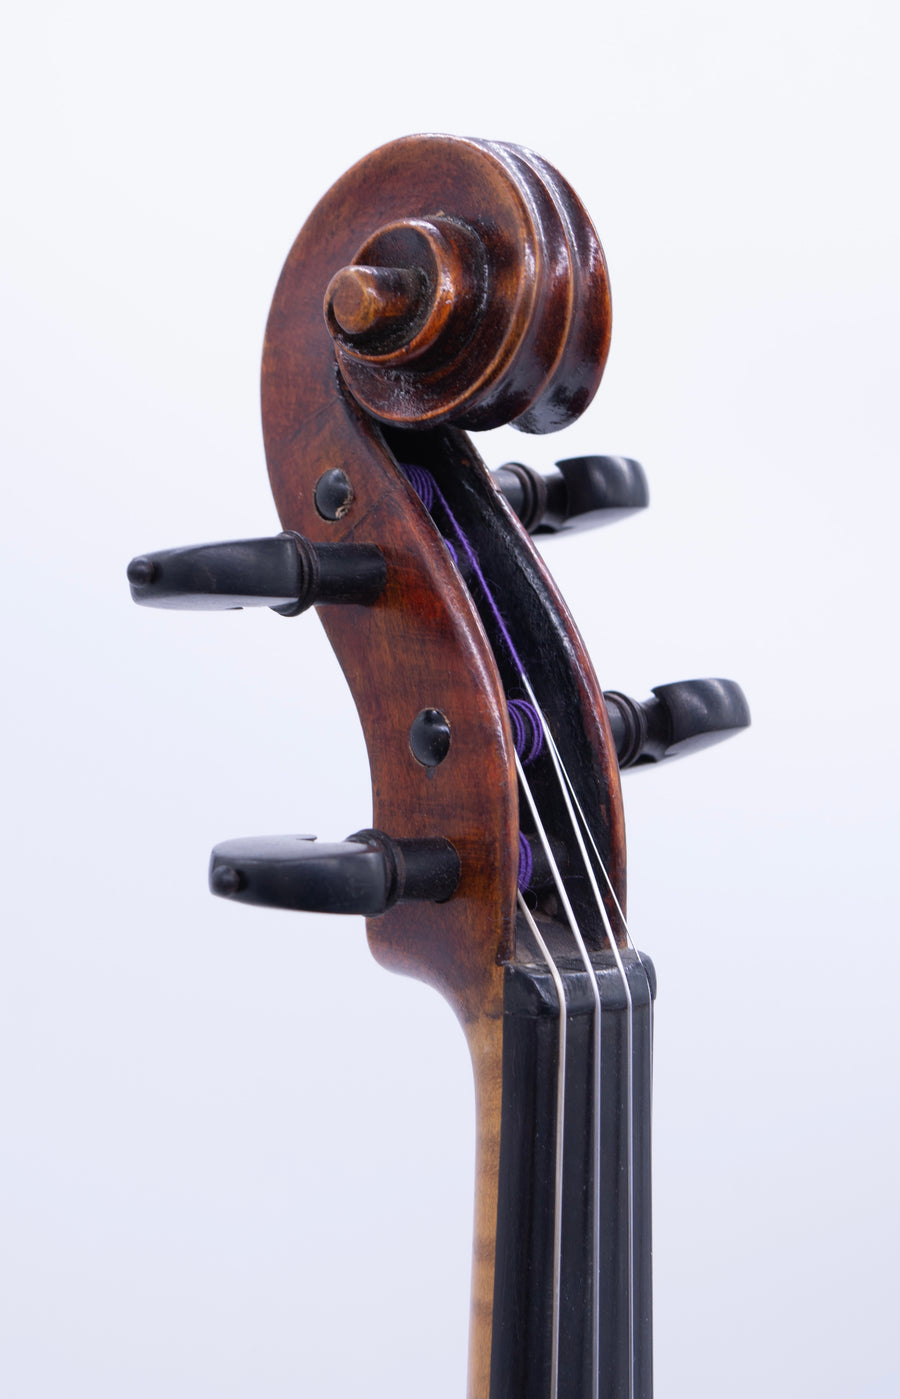 A Canadian Violin from 1901 By J.W. Hinchcliffe.